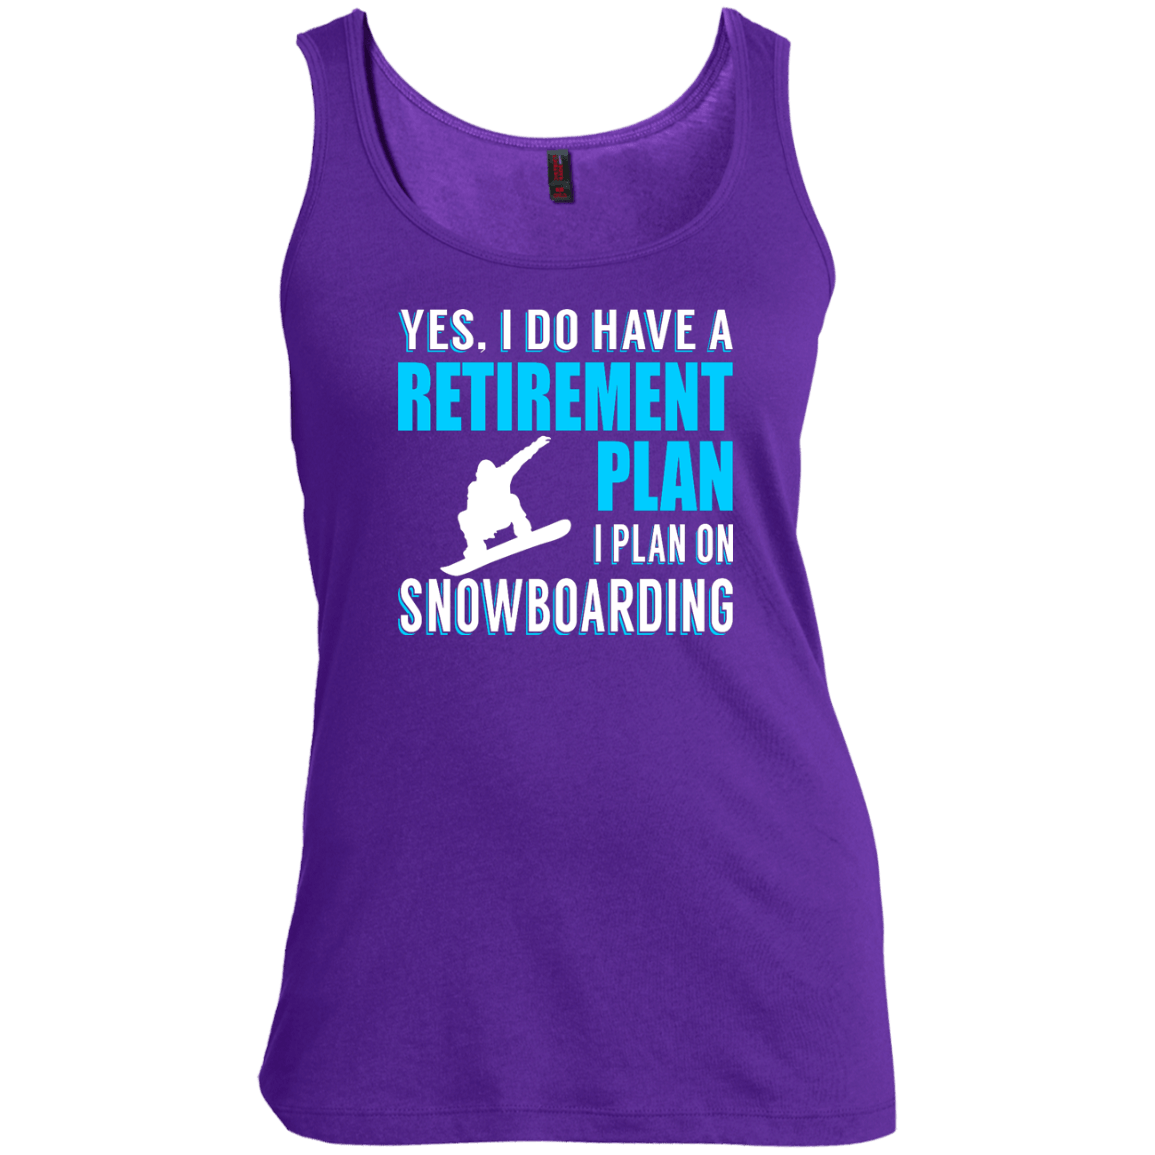 Yes, I Do Have A Retirement Plan - I Plan On Snowboarding Tank Tops - Powderaddicts